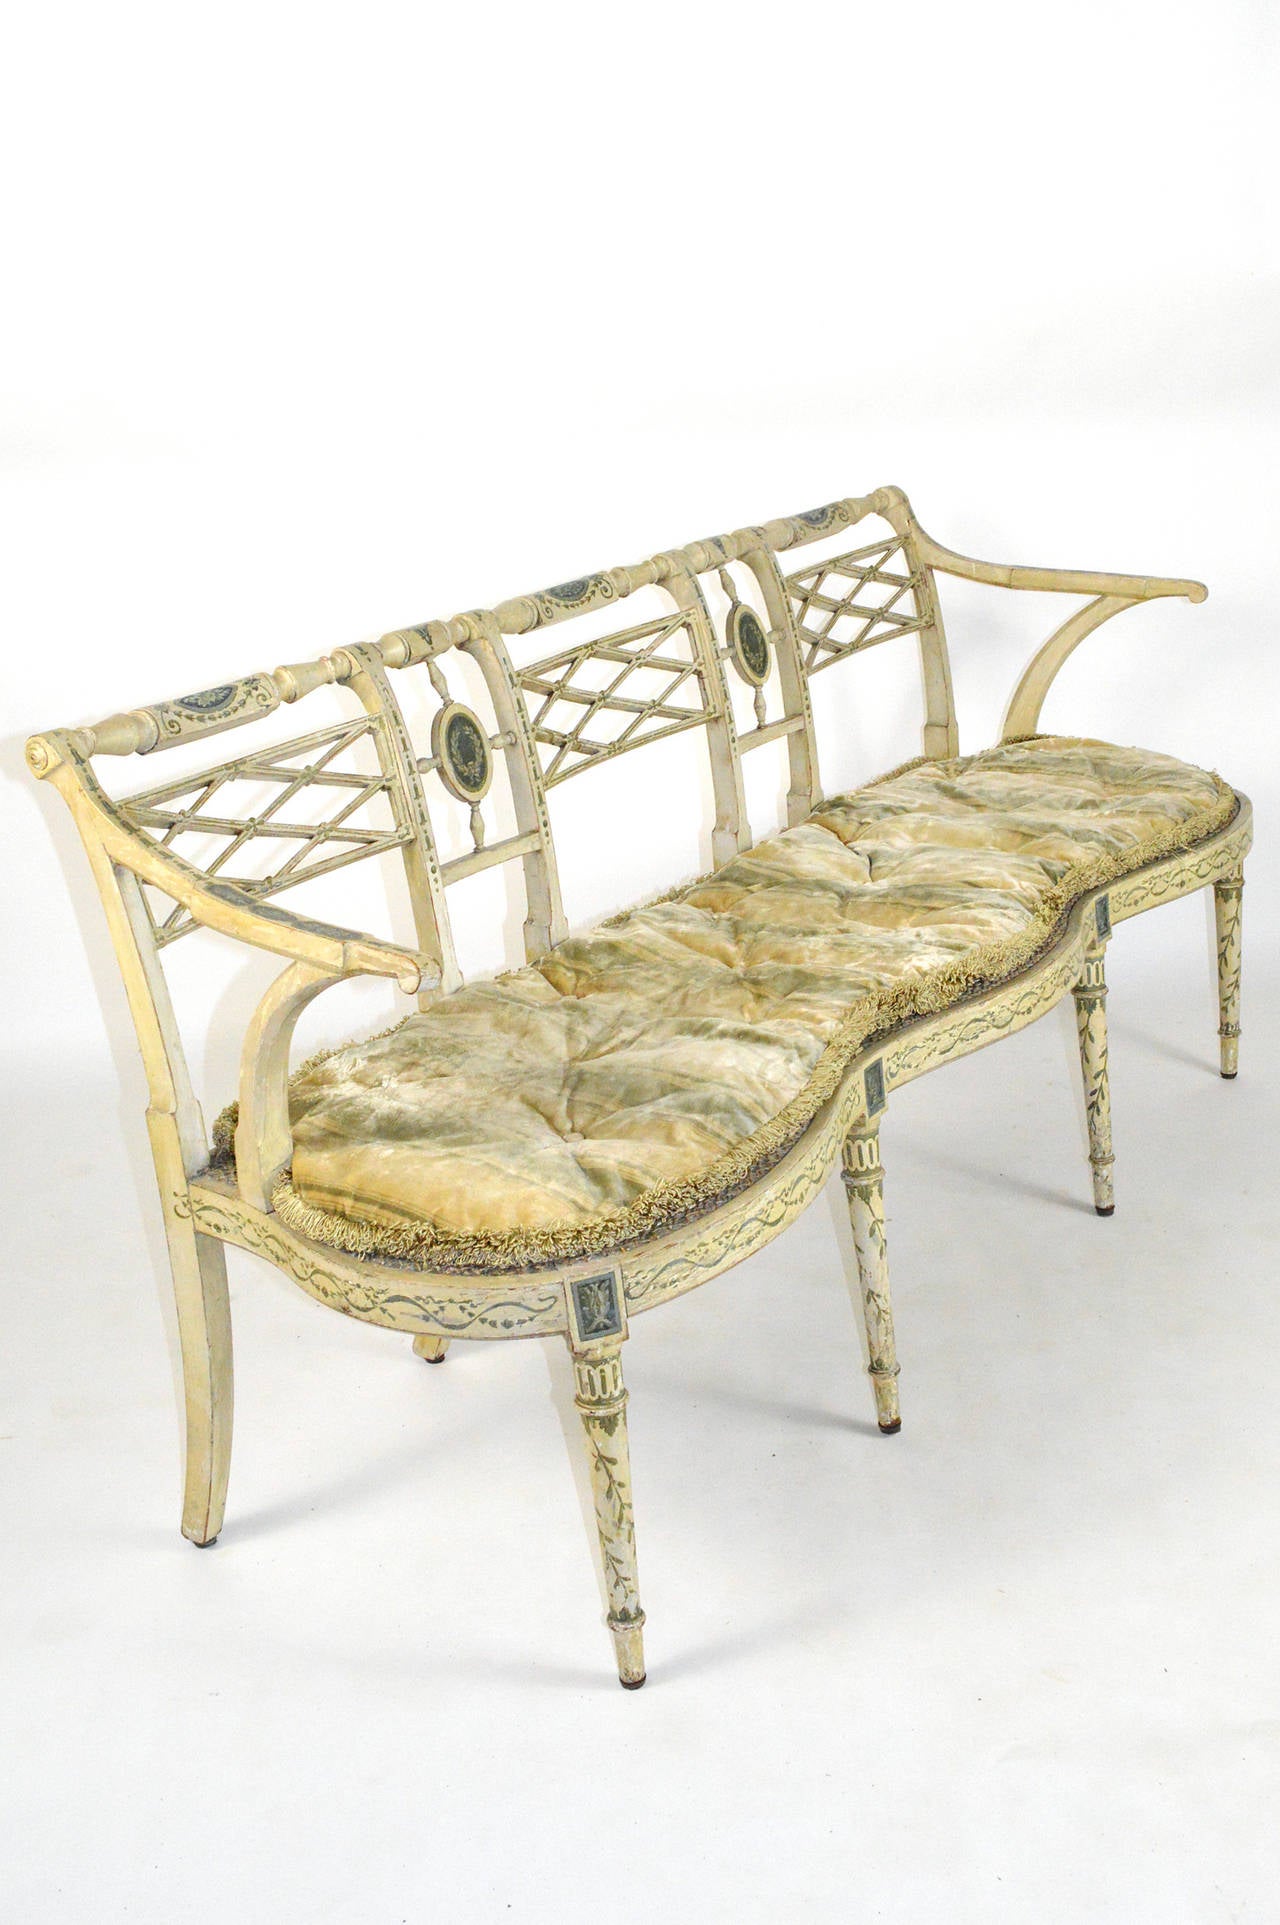 A fine 19th Century Neoclassical Style painted three seat settee. Having a cane seat, turned legs, and a serpentine frame. Fitted with a loose cushion. Painted in Neoclassical taste. Circa 1820.